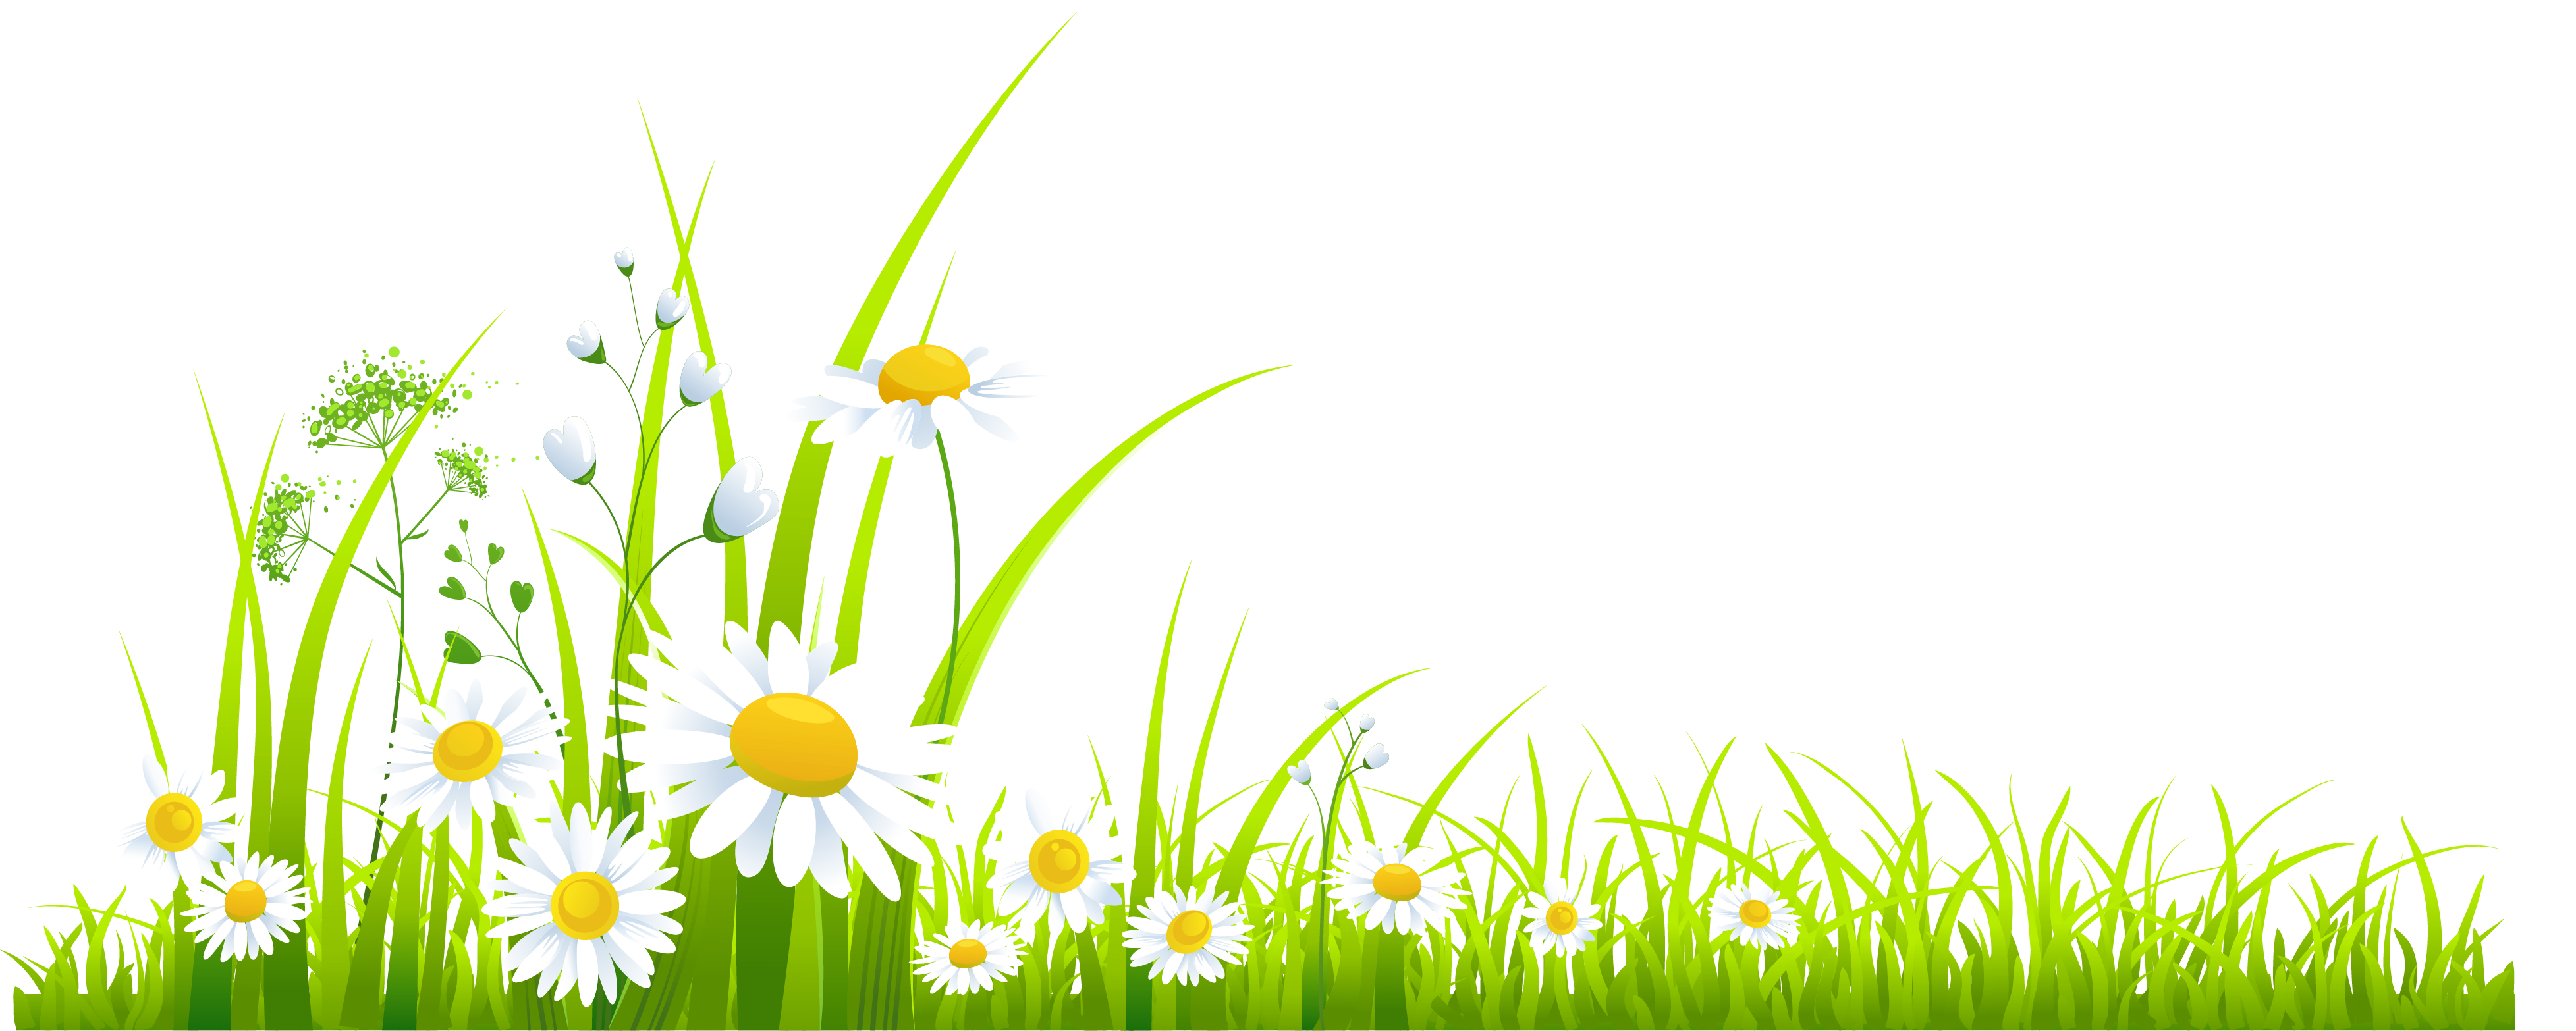 spring clipart background - photo #19